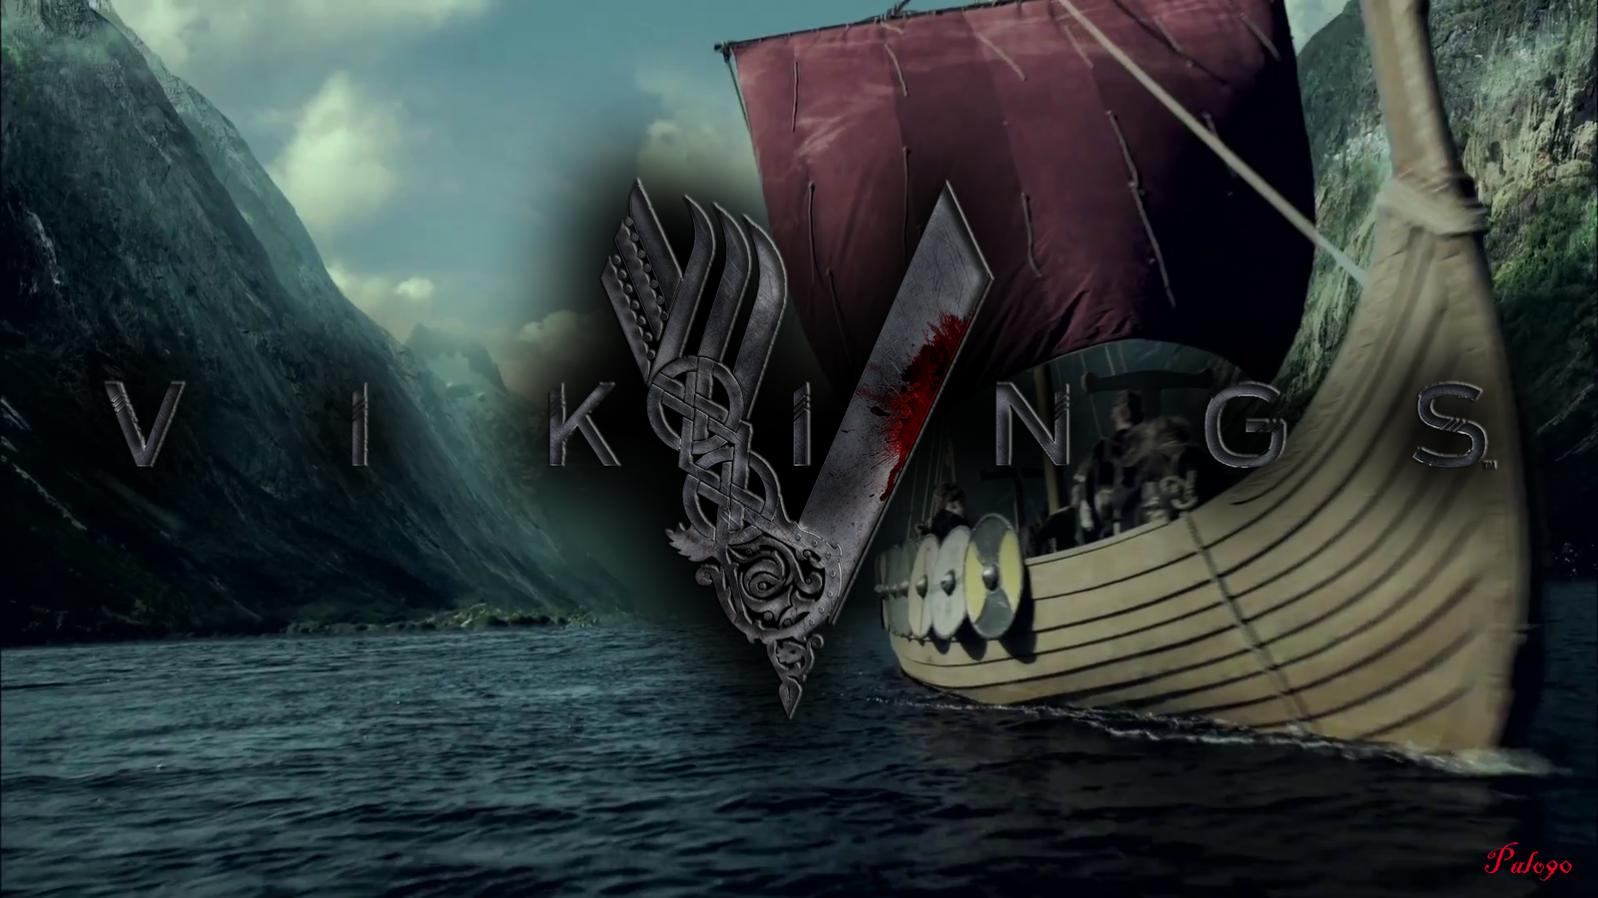 Gallery for - hd wallpapers viking